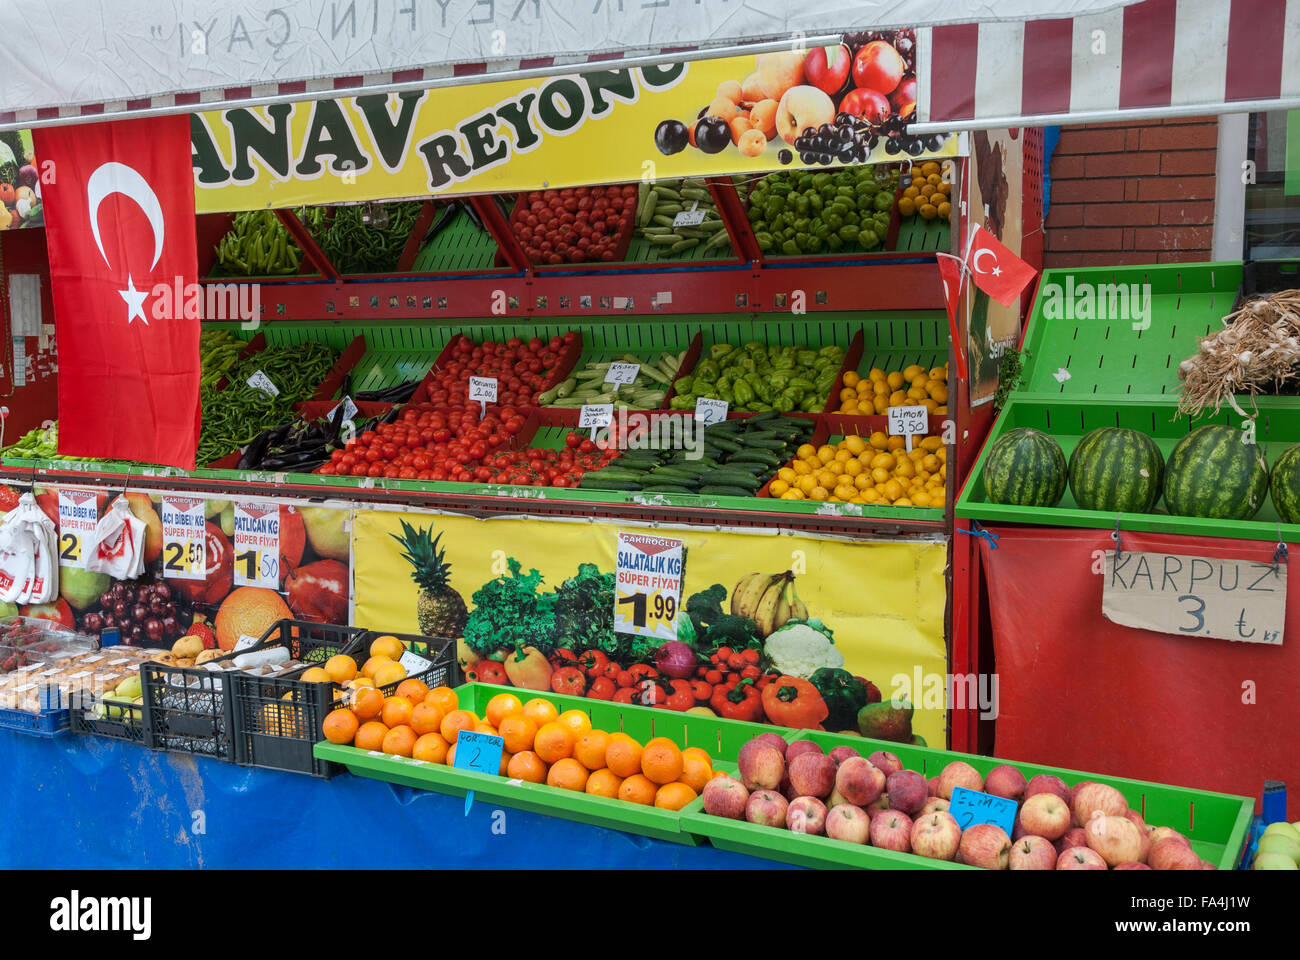 A fruiterer's shop in the open market of the city on April 23, 2014 in . Stock Photo